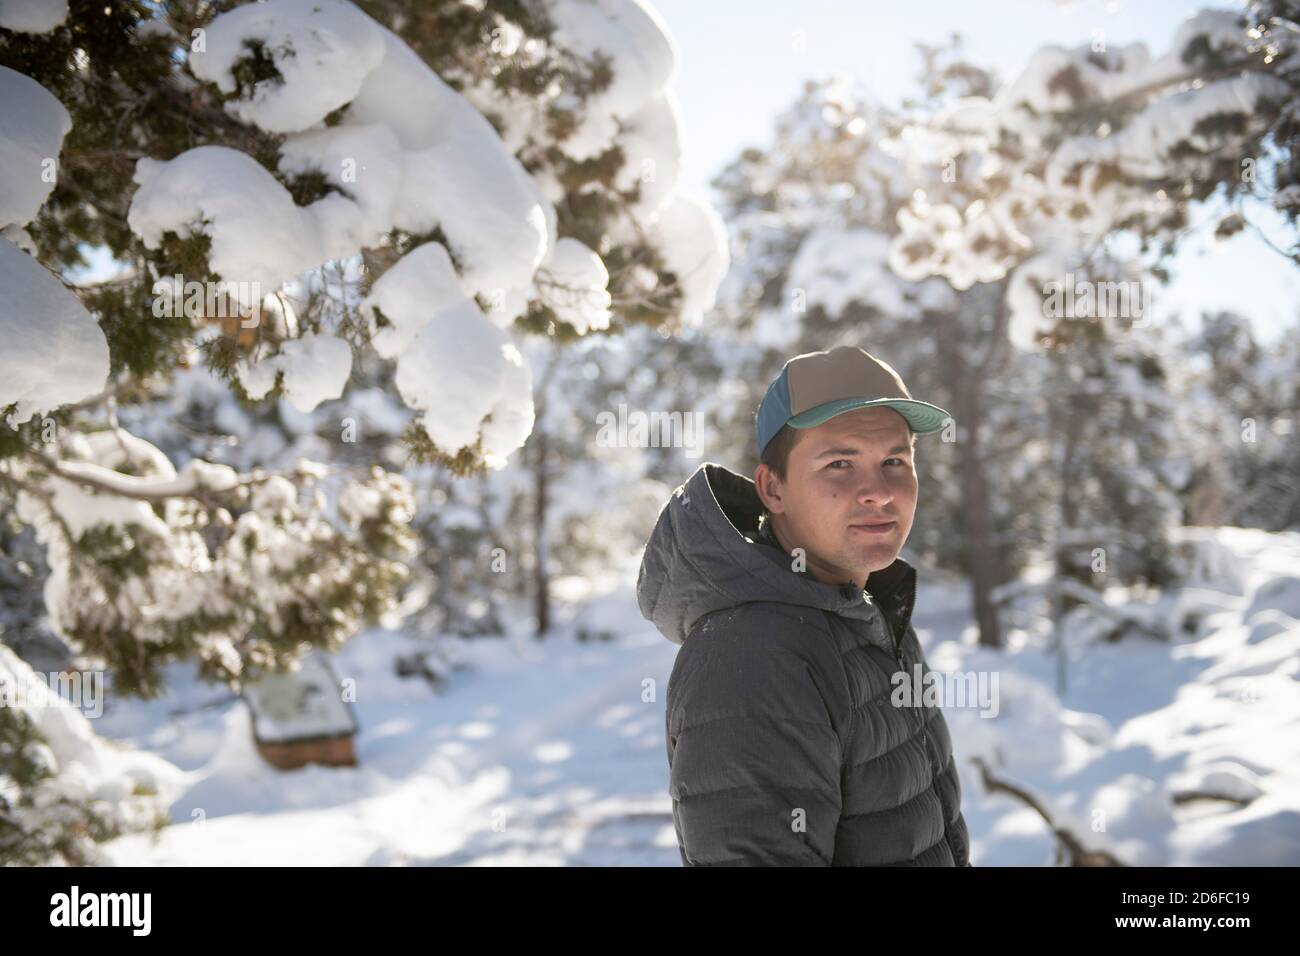 Young adult male smiling at camera in bright snowy pine forest Stock Photo